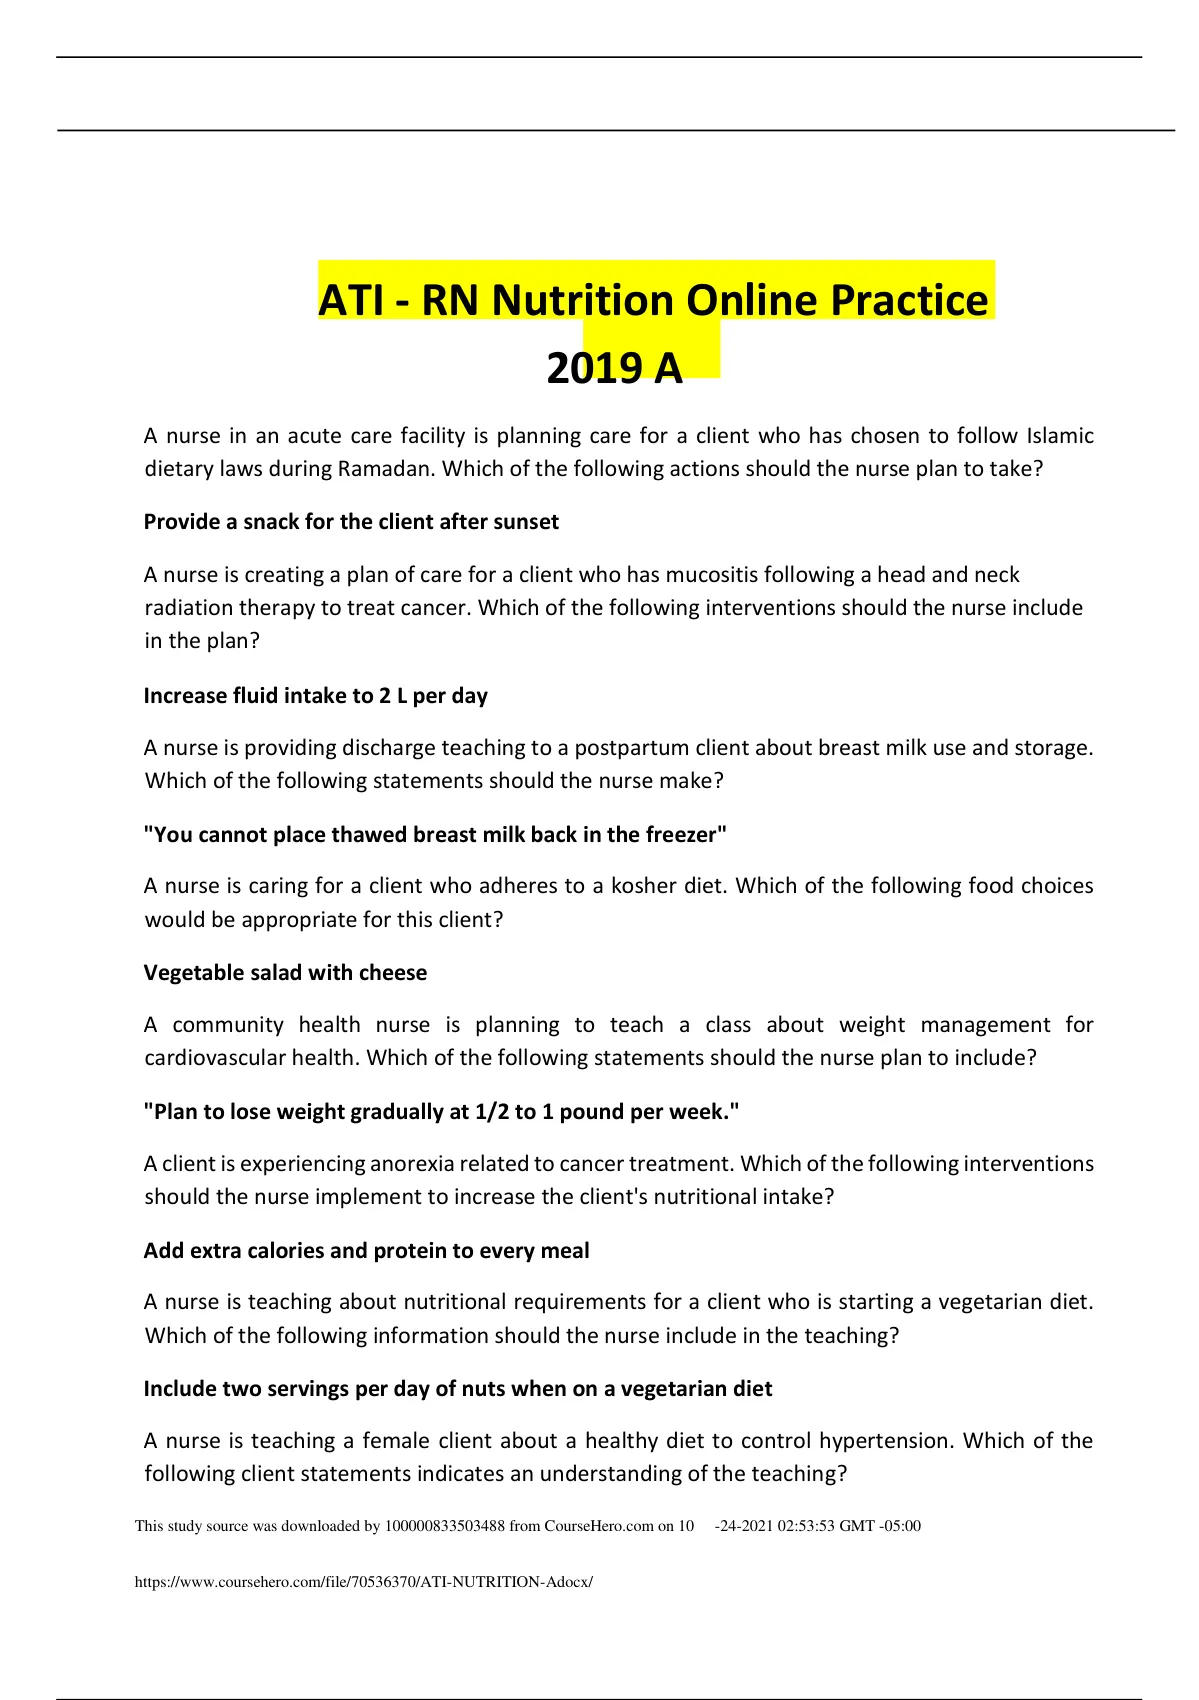 ATI RN Nutrition Online Practice Combined A &B Test Exam With